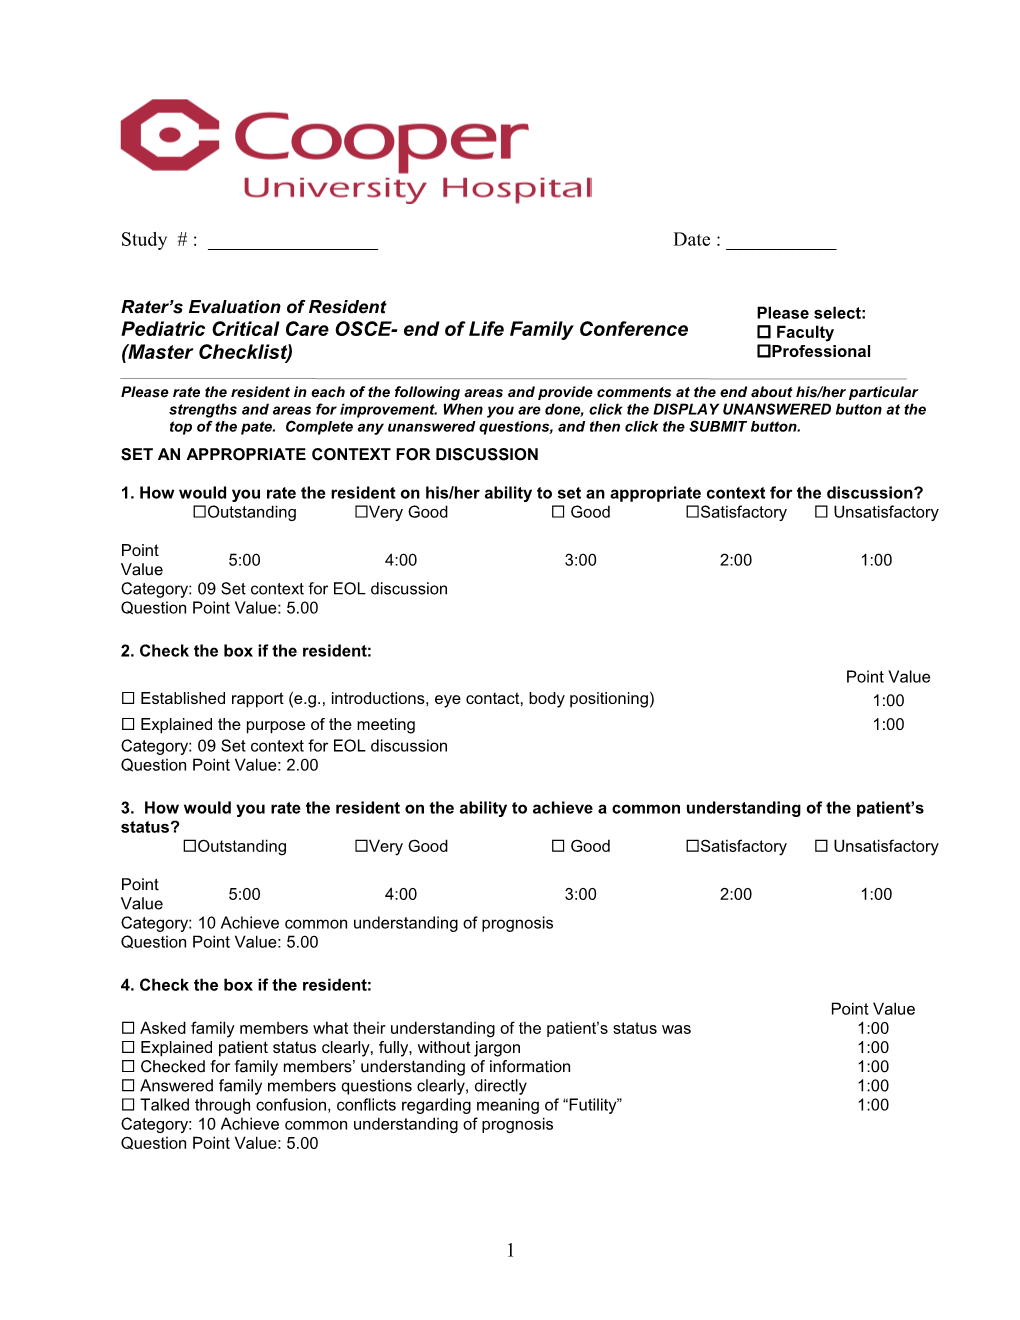 Pediatric Critical Care Evaluation of Resident